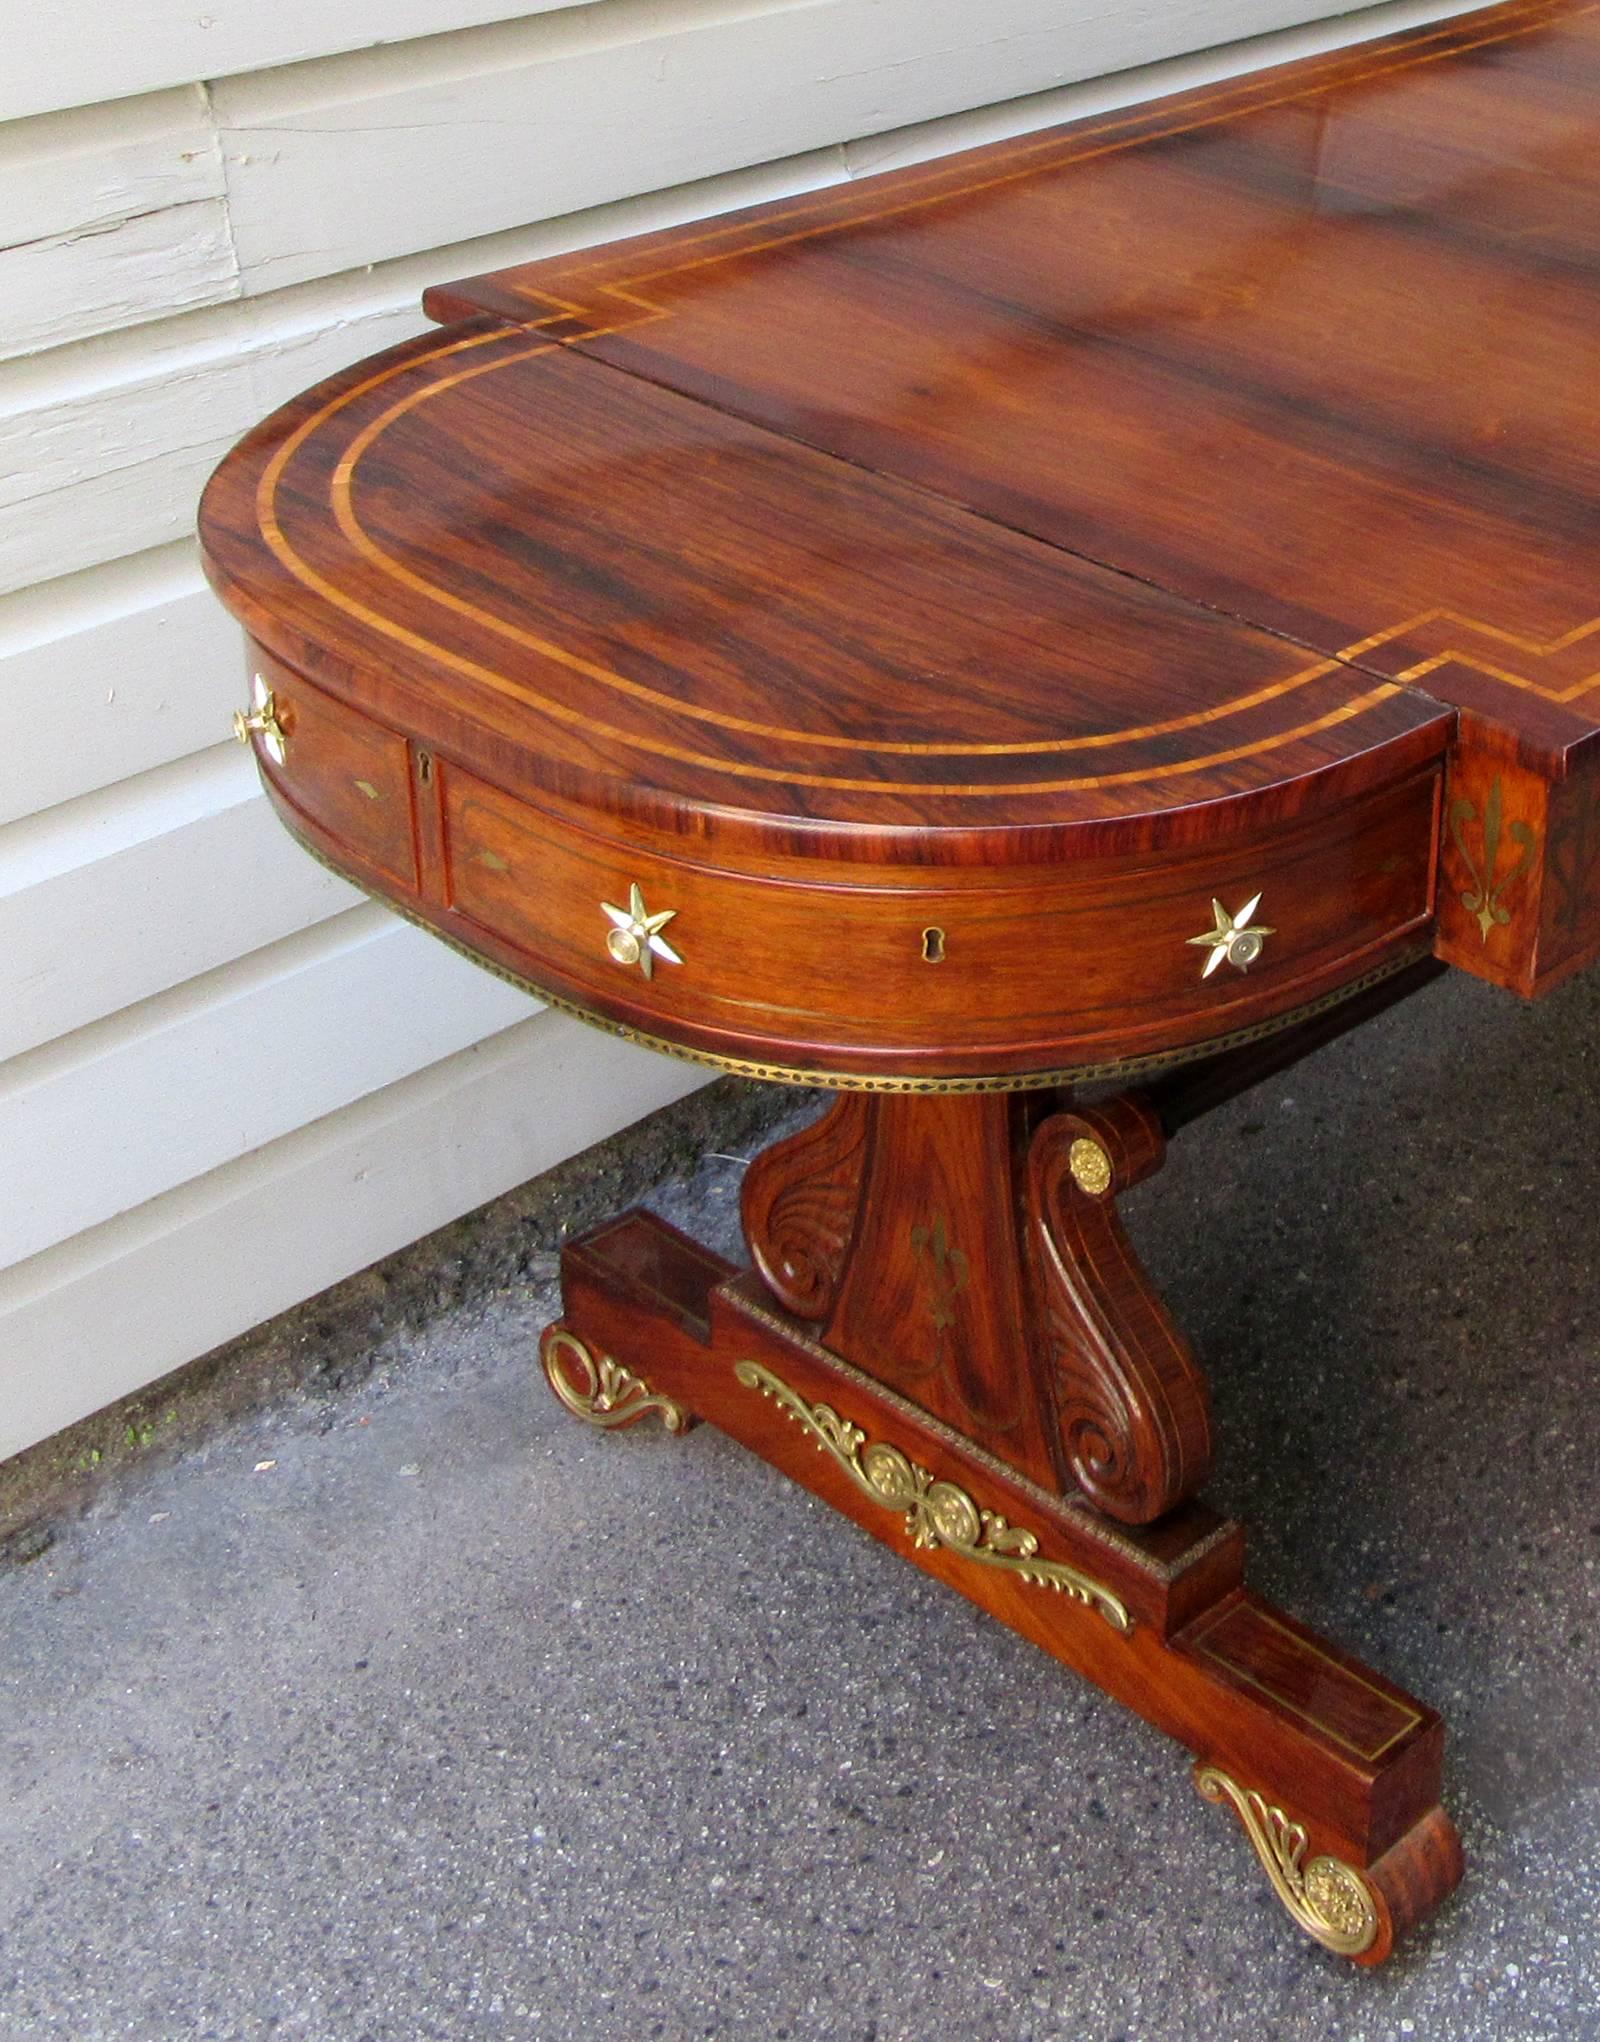 18th Century 19th Century English Regency Rosewood Sofa Table Attributed to Gillows